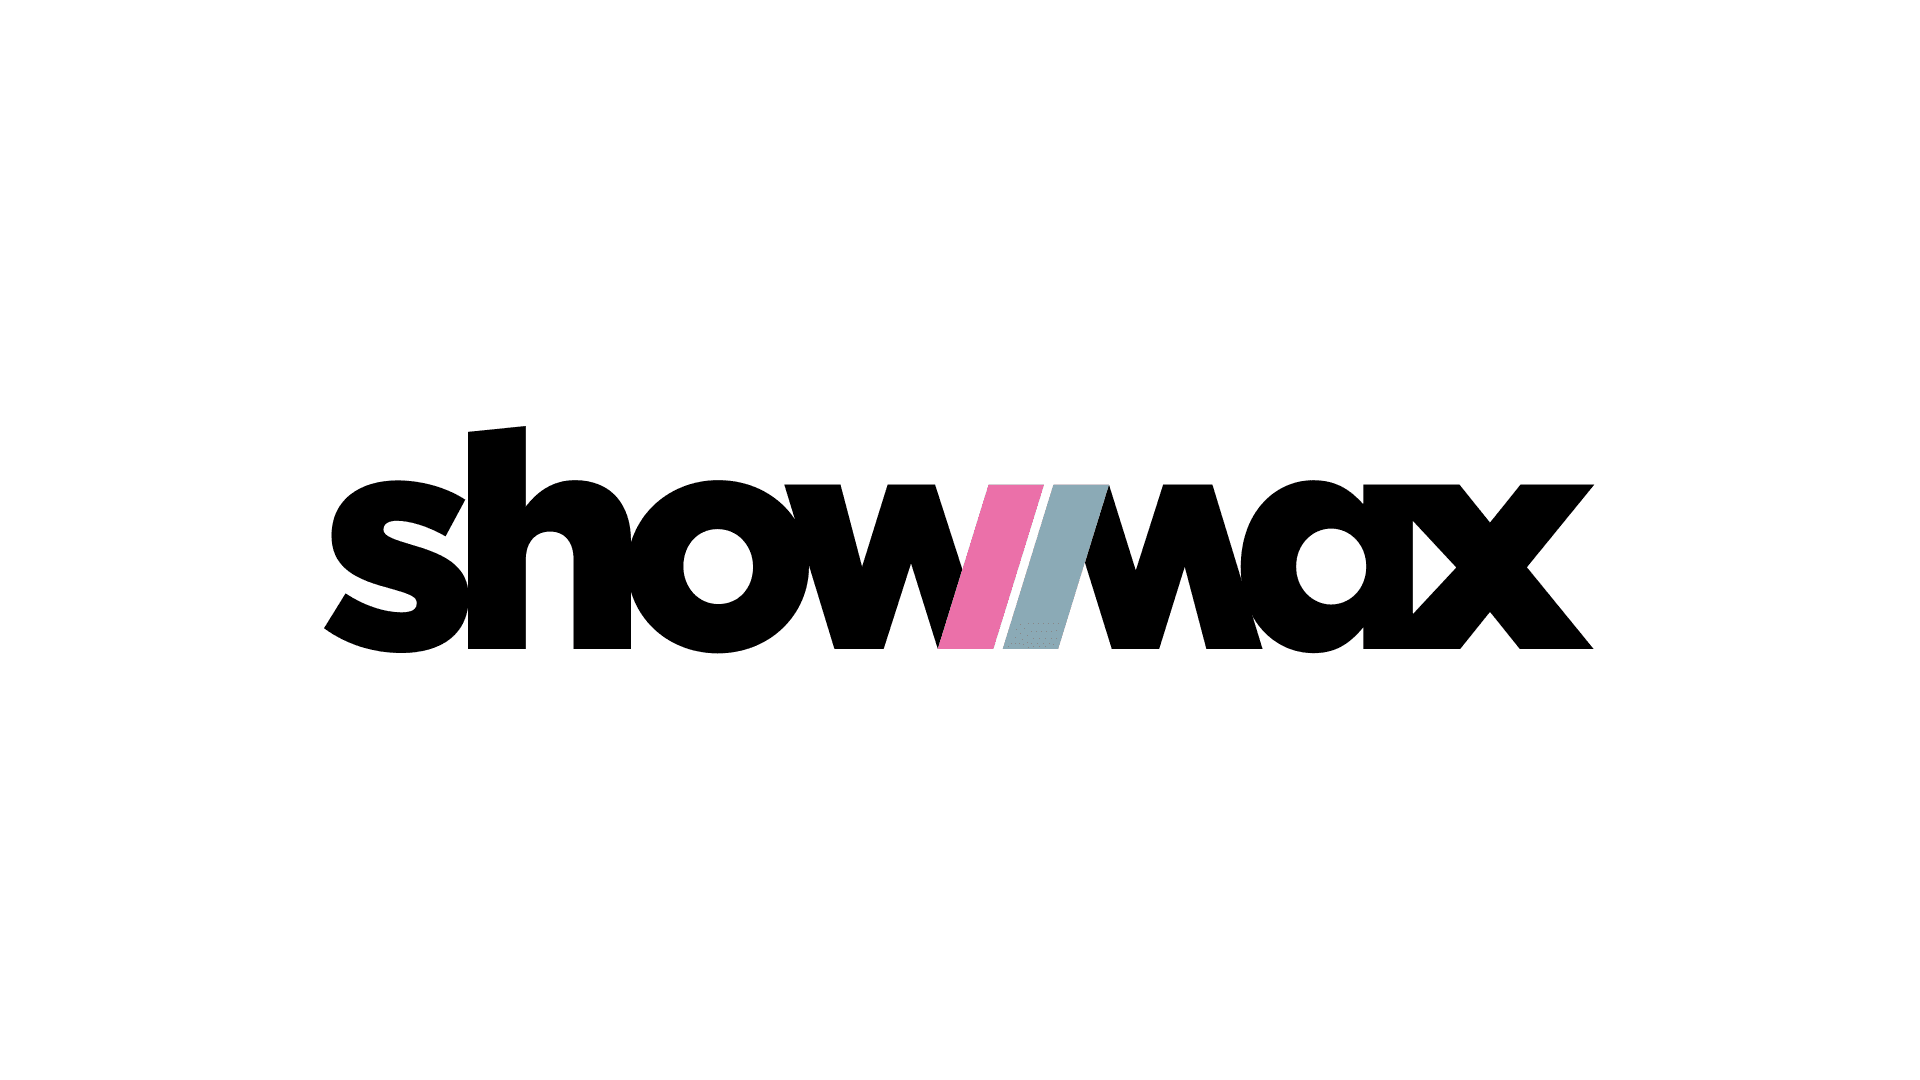 MultiChoice, NBCUniversal partner to Relaunch Showmax